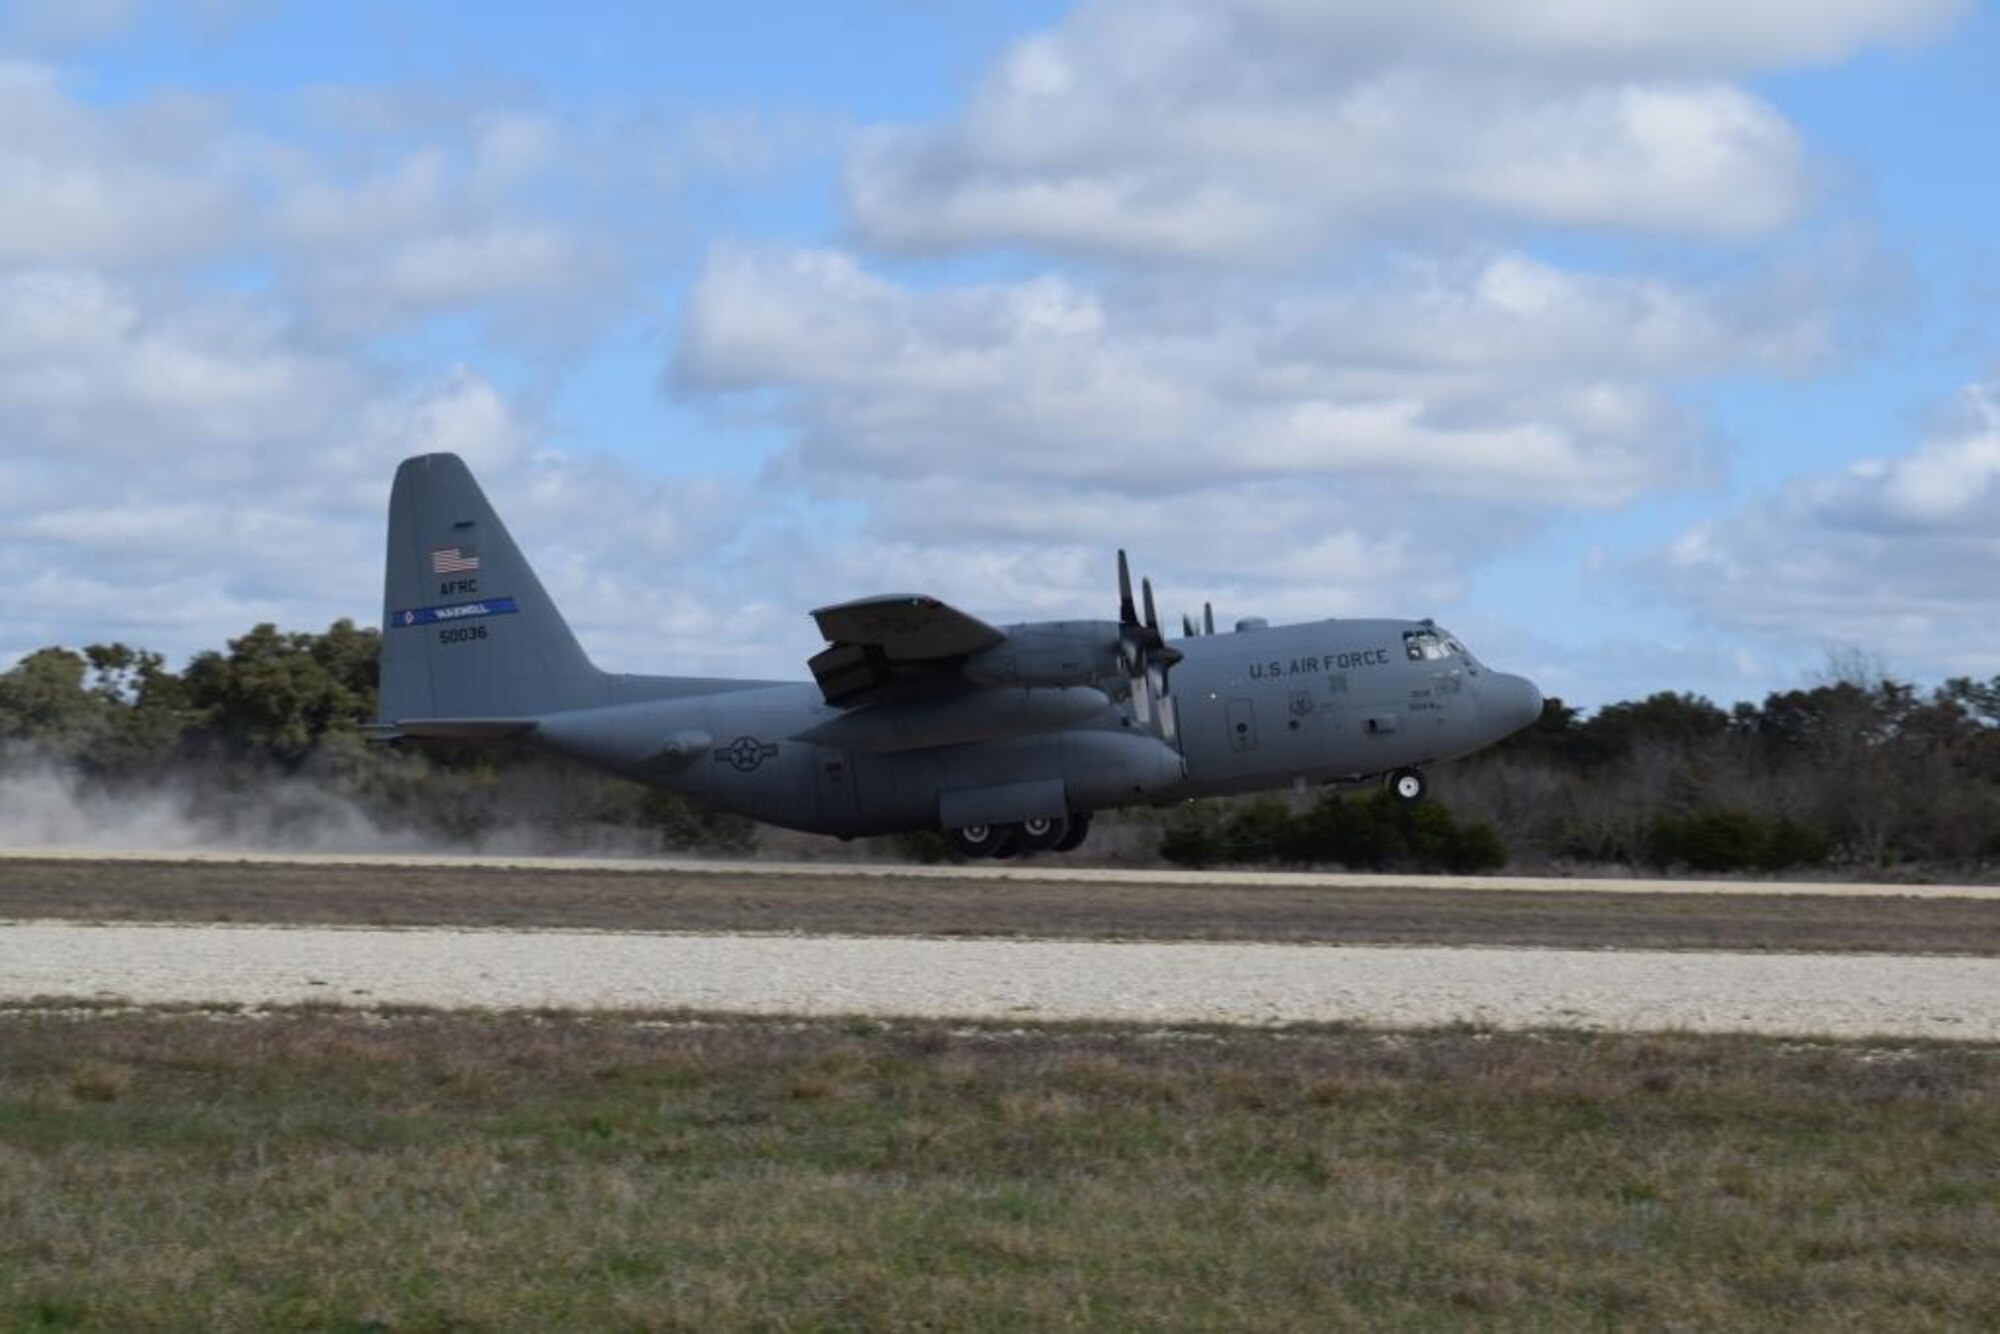 A C-130 Hercules assigned to the 908th Airlift Wing at Maxwell Air Force Base, Alabama takes off from Camp Bullis Training Annex’s assault runway after picking up patients during the aeromedical evacuation exercise, Alamo Shield, Feb. 27, 2016. Members of the 433rd Aeromedical Evacuation Squadron, 433rd Airlift Control Flight, 433rd Aeromedical Staging Squadron and the 433rd Aerospace Medicine Squadron’s Critical Care Air Transport Team worked together to provide the logistics and execution of evacuating injured patients out of the fictitious war zone. (U.S. Air Force photo/Senior Airman Bryan Swink)